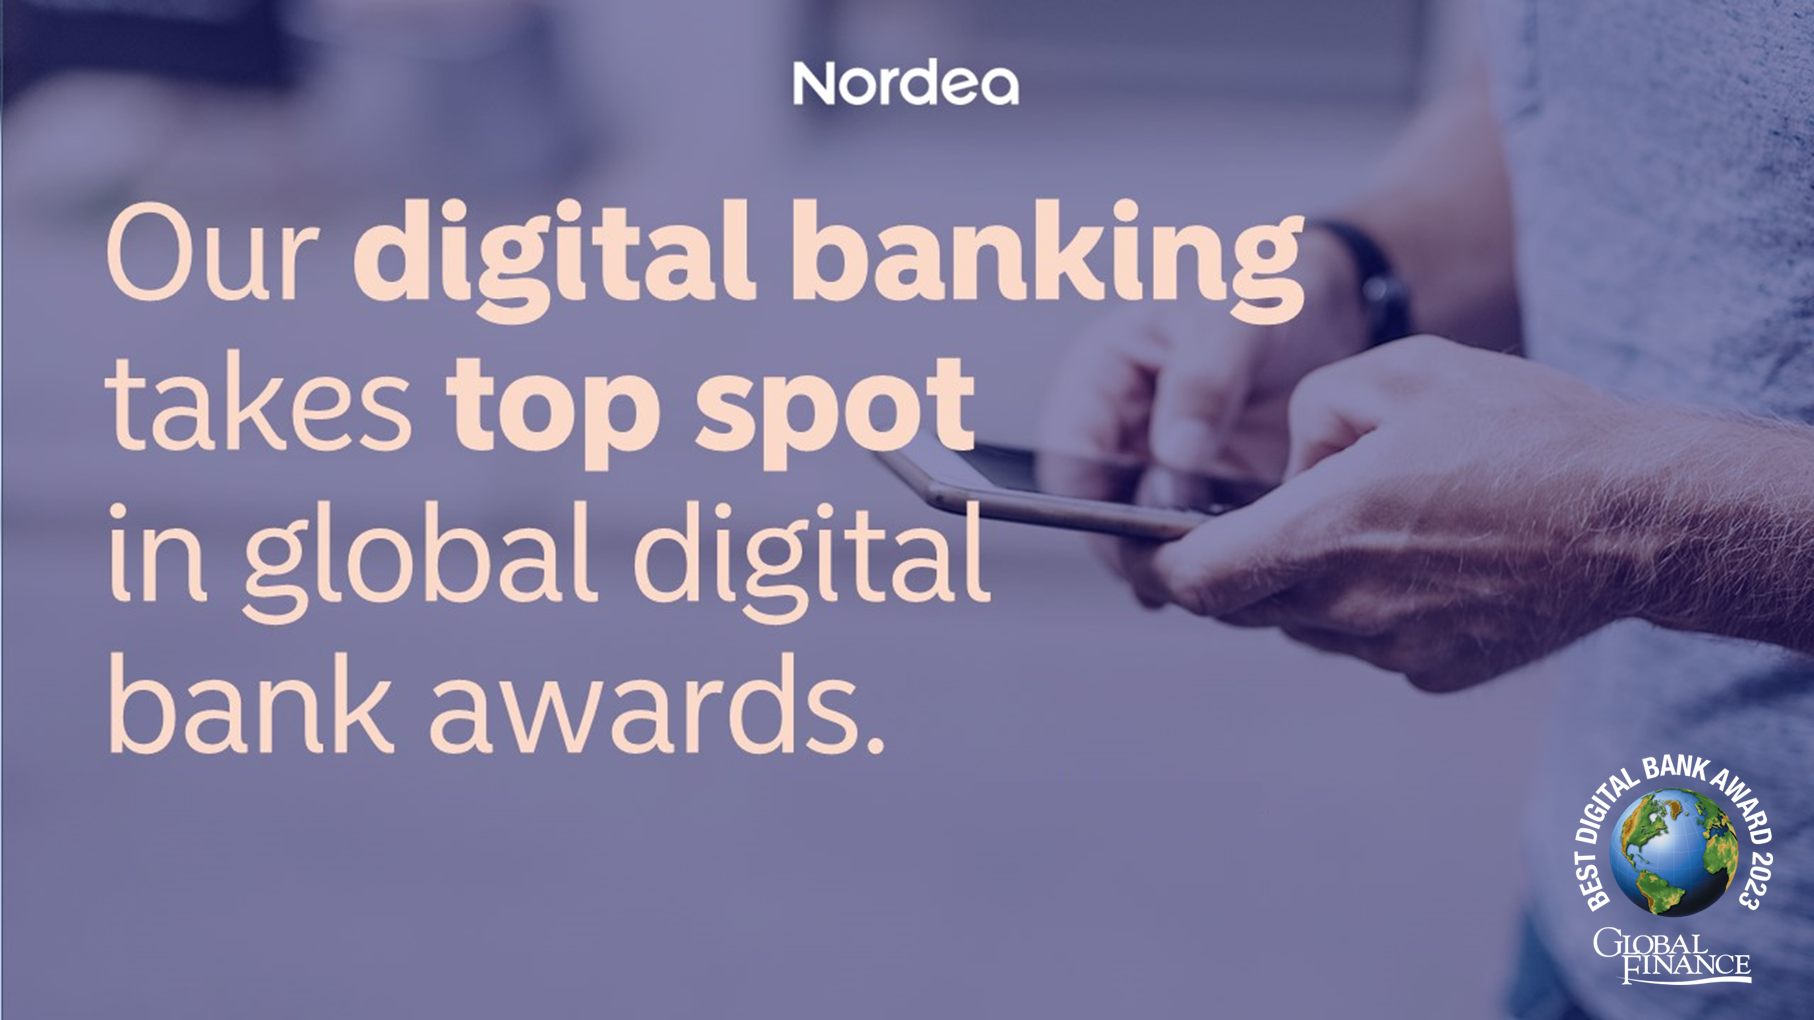 Our digital banking takes top spot in digital bank awards